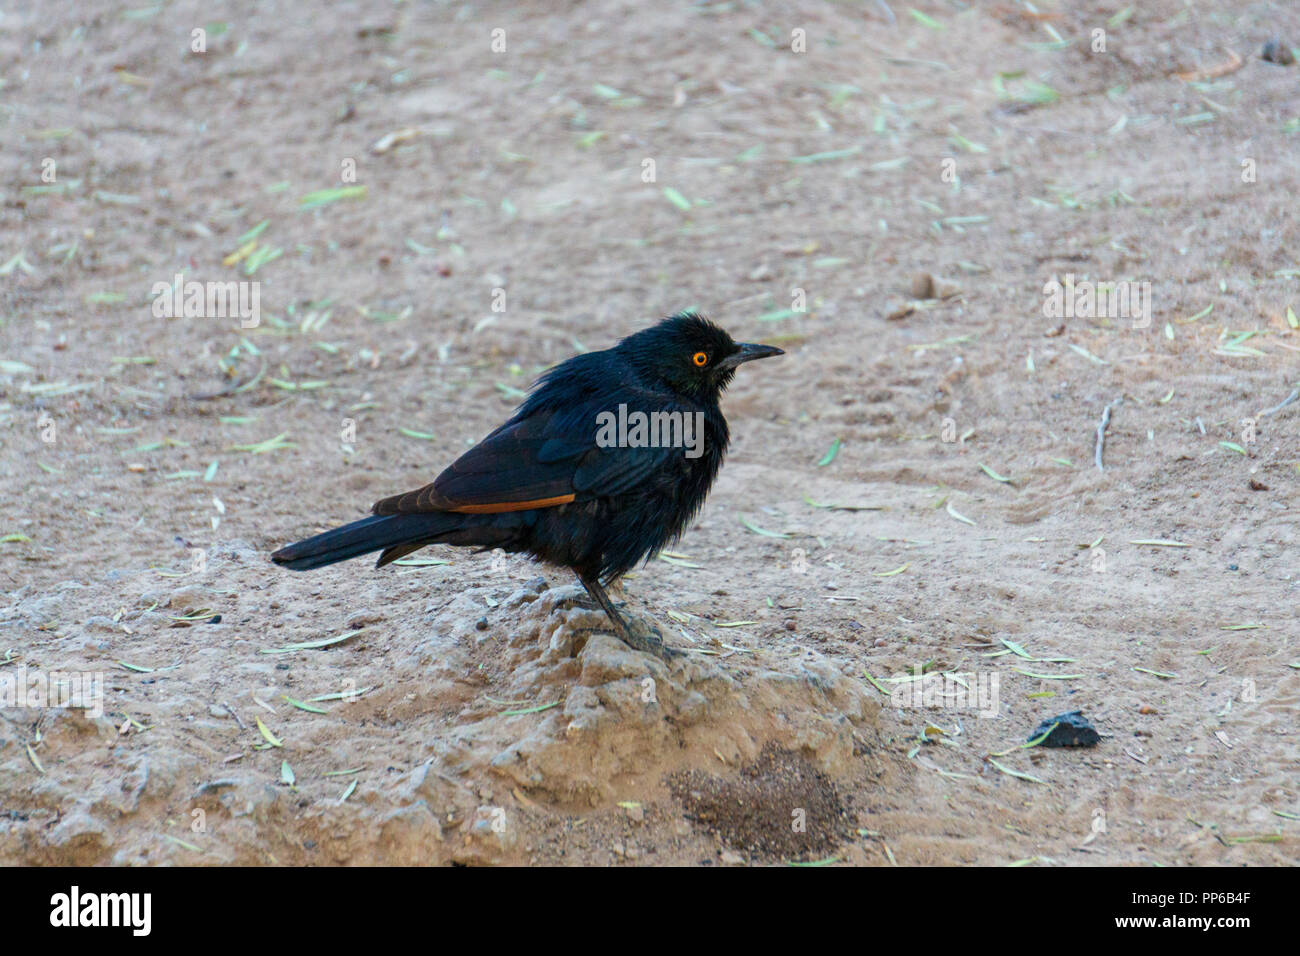 Red-shouldered Glossy Starling africa at namibia Stock Photo